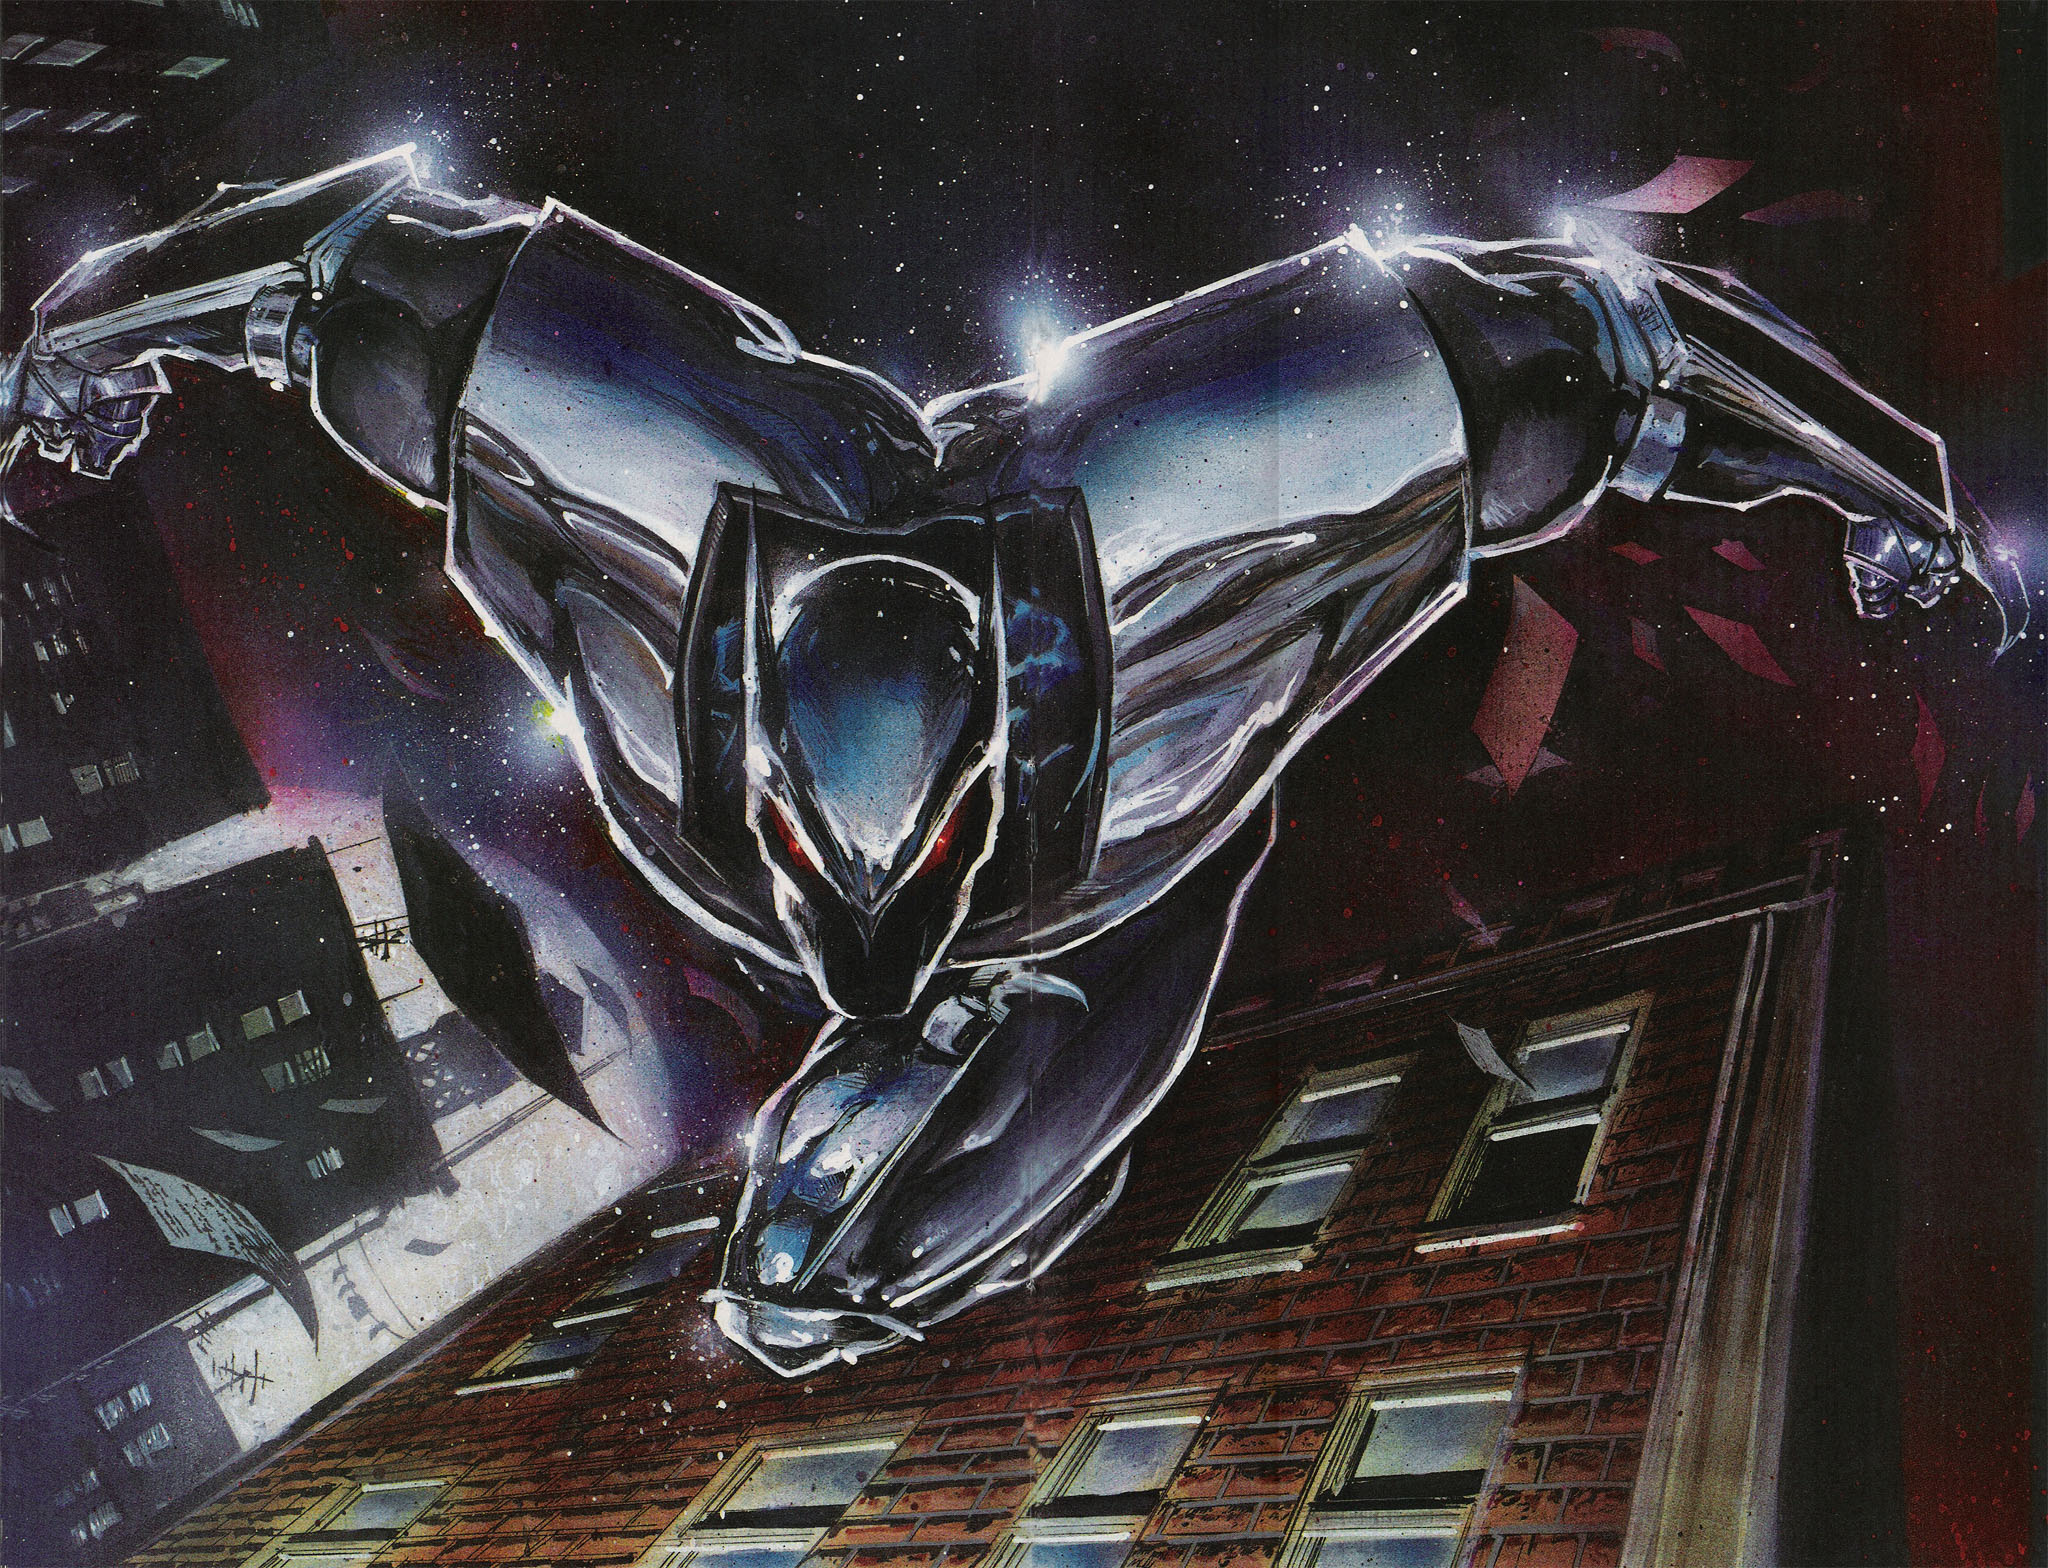 The Last Shadowhawk - to celebrate the 30th anniversary